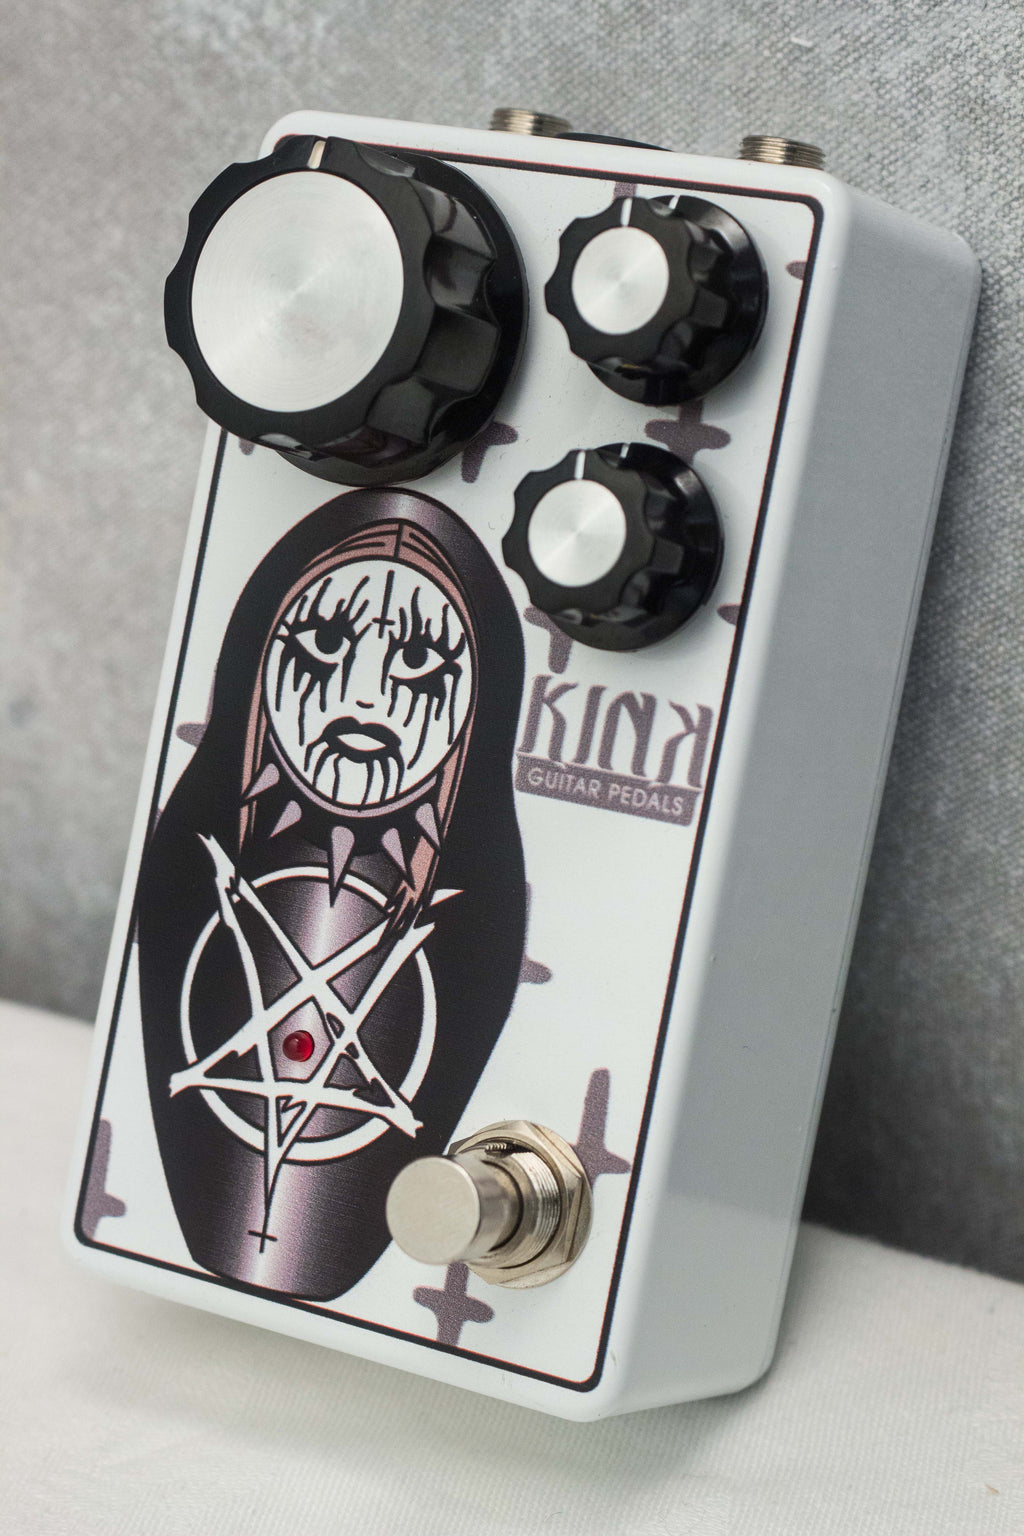 Kink Defeder of the Hate Fuzz Pedal